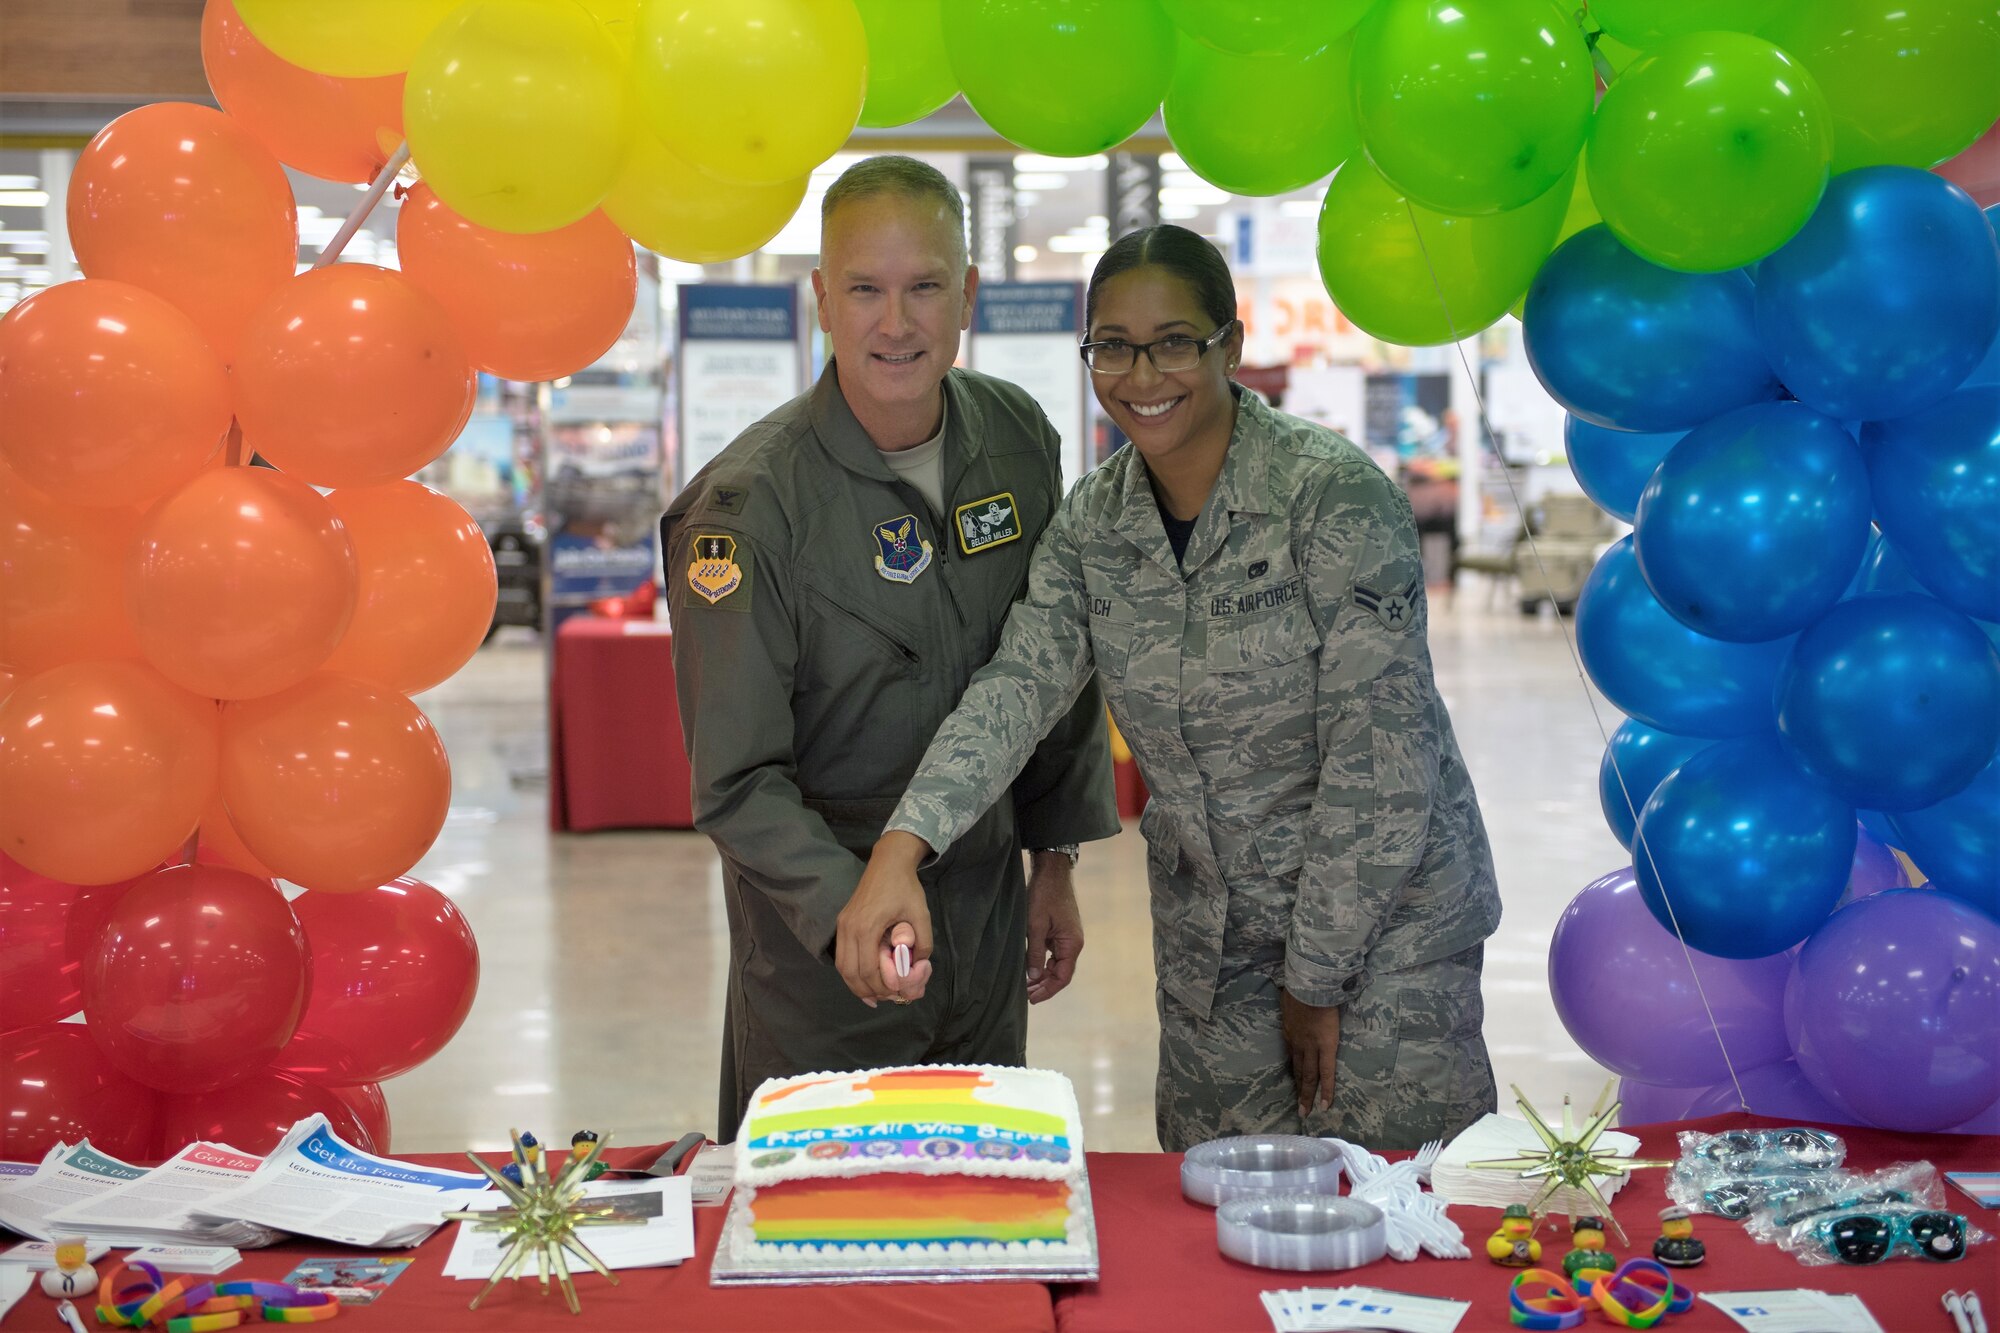 Col. Michael Miller, 2nd Bomb Wing commander, and Airman 1st Class Wenona Welch, 2nd Logistics Readiness Squadron, cut a cake during Barksdale's LGBT Pride Month observance event, June 22, 2018. (U.S. Air Force photo by Tech. Sgt. Daniel Martinez)